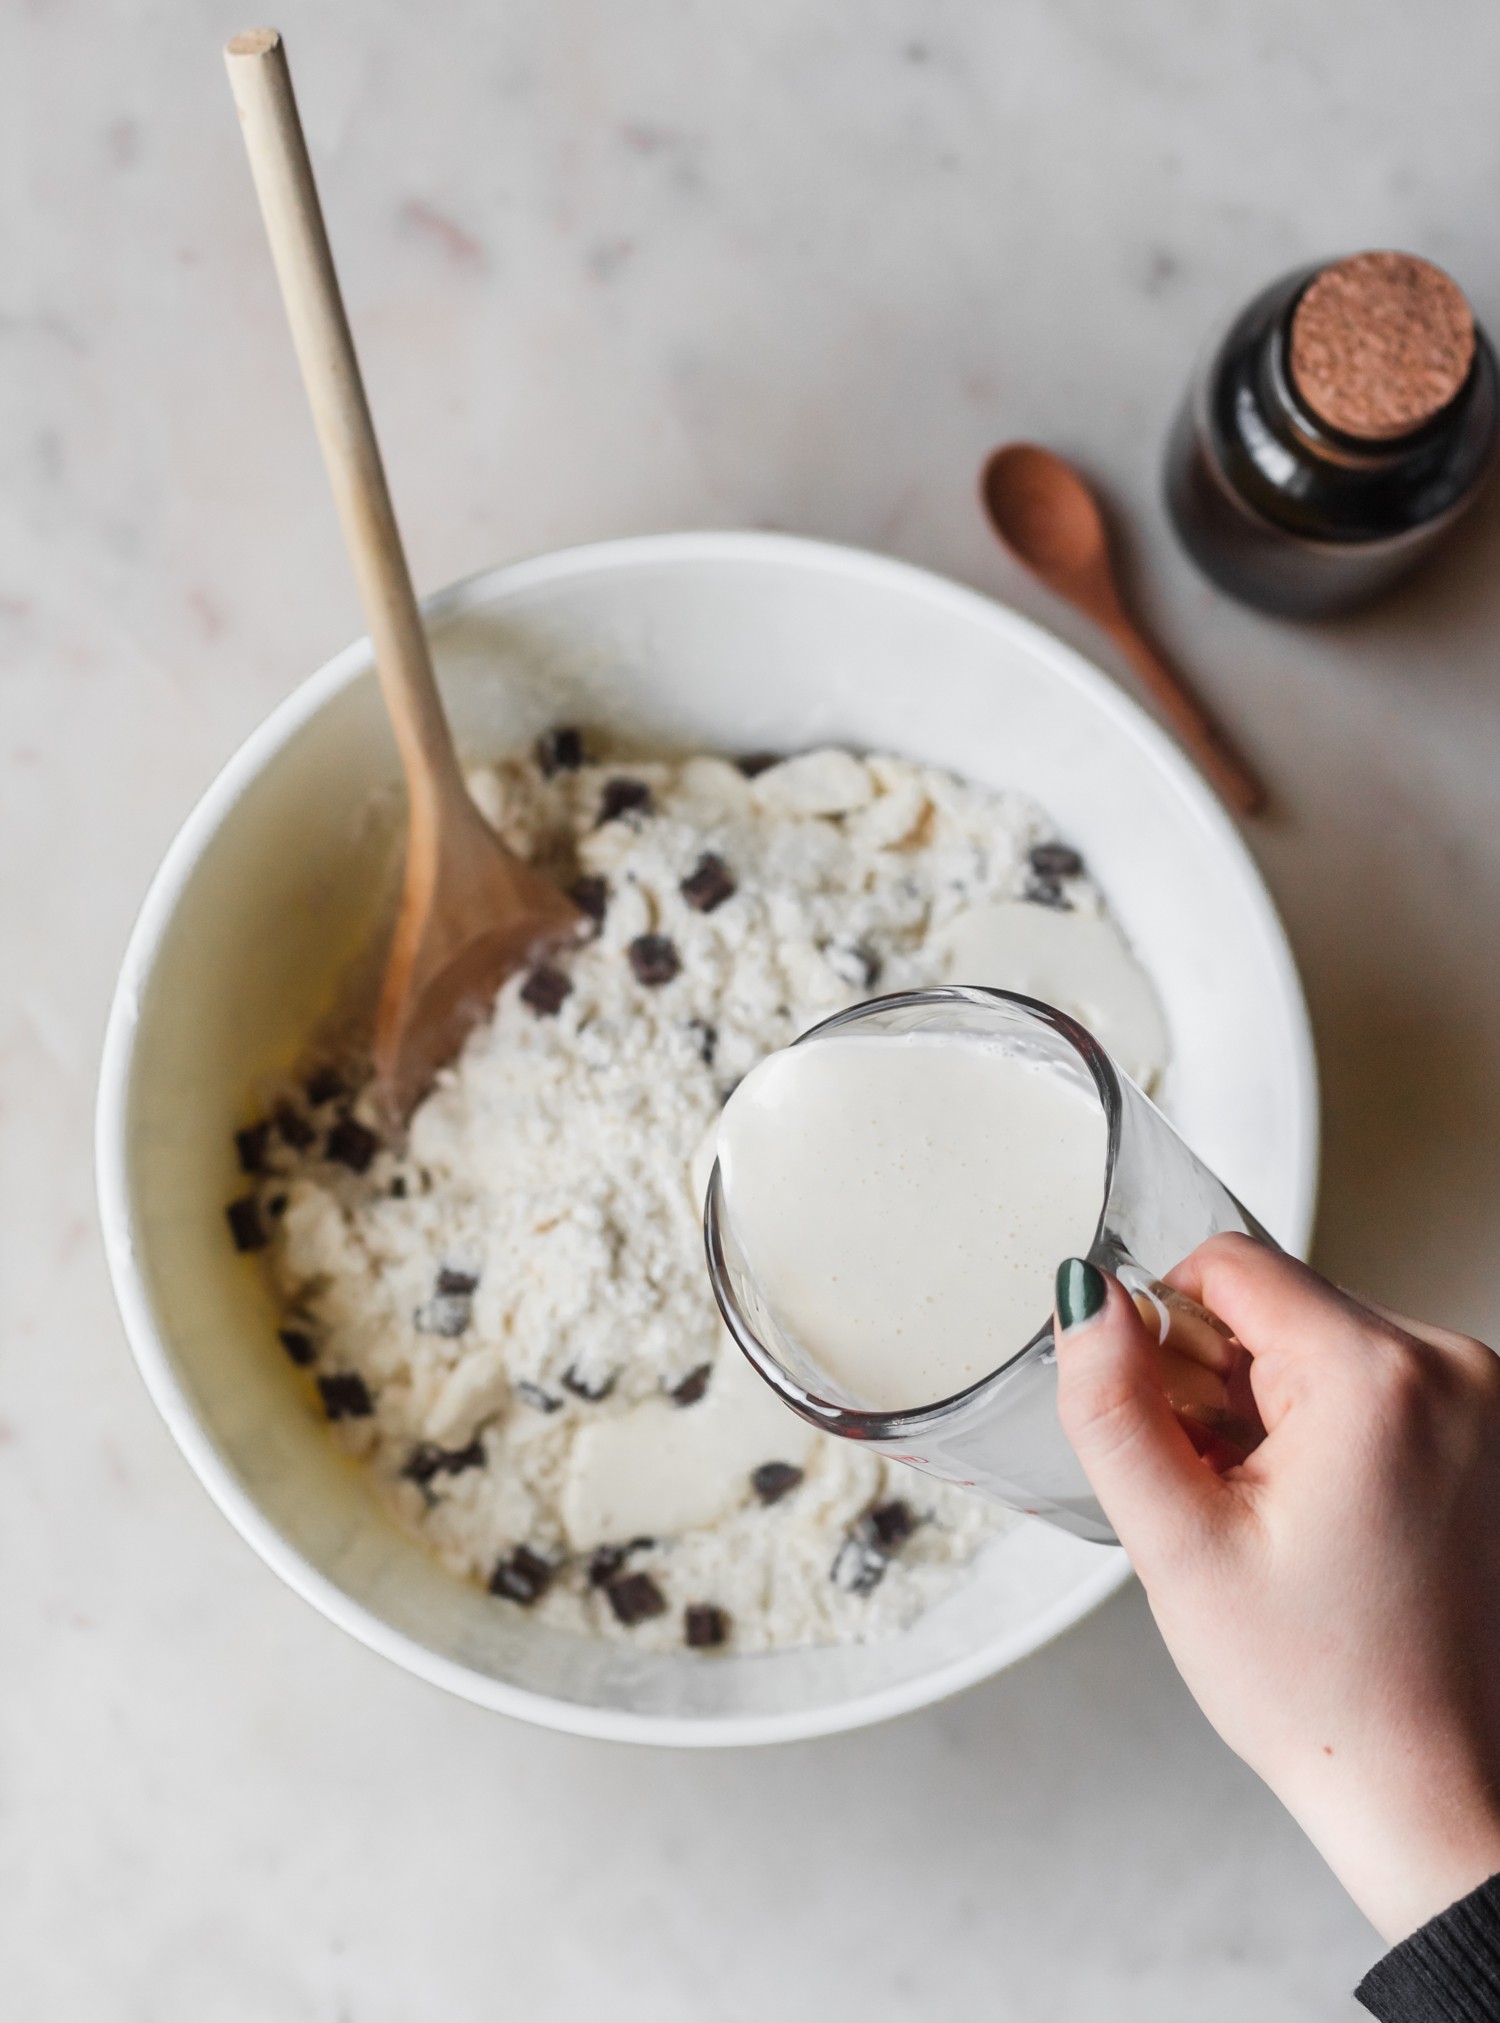 A white bowl filled with flour and chocolate chunks. There is a wooden spoon in the corner, and a woman's hand is pouring cream into the bowl. The bowl is on a white surface, and there is a jar of vanilla extract in the corner.